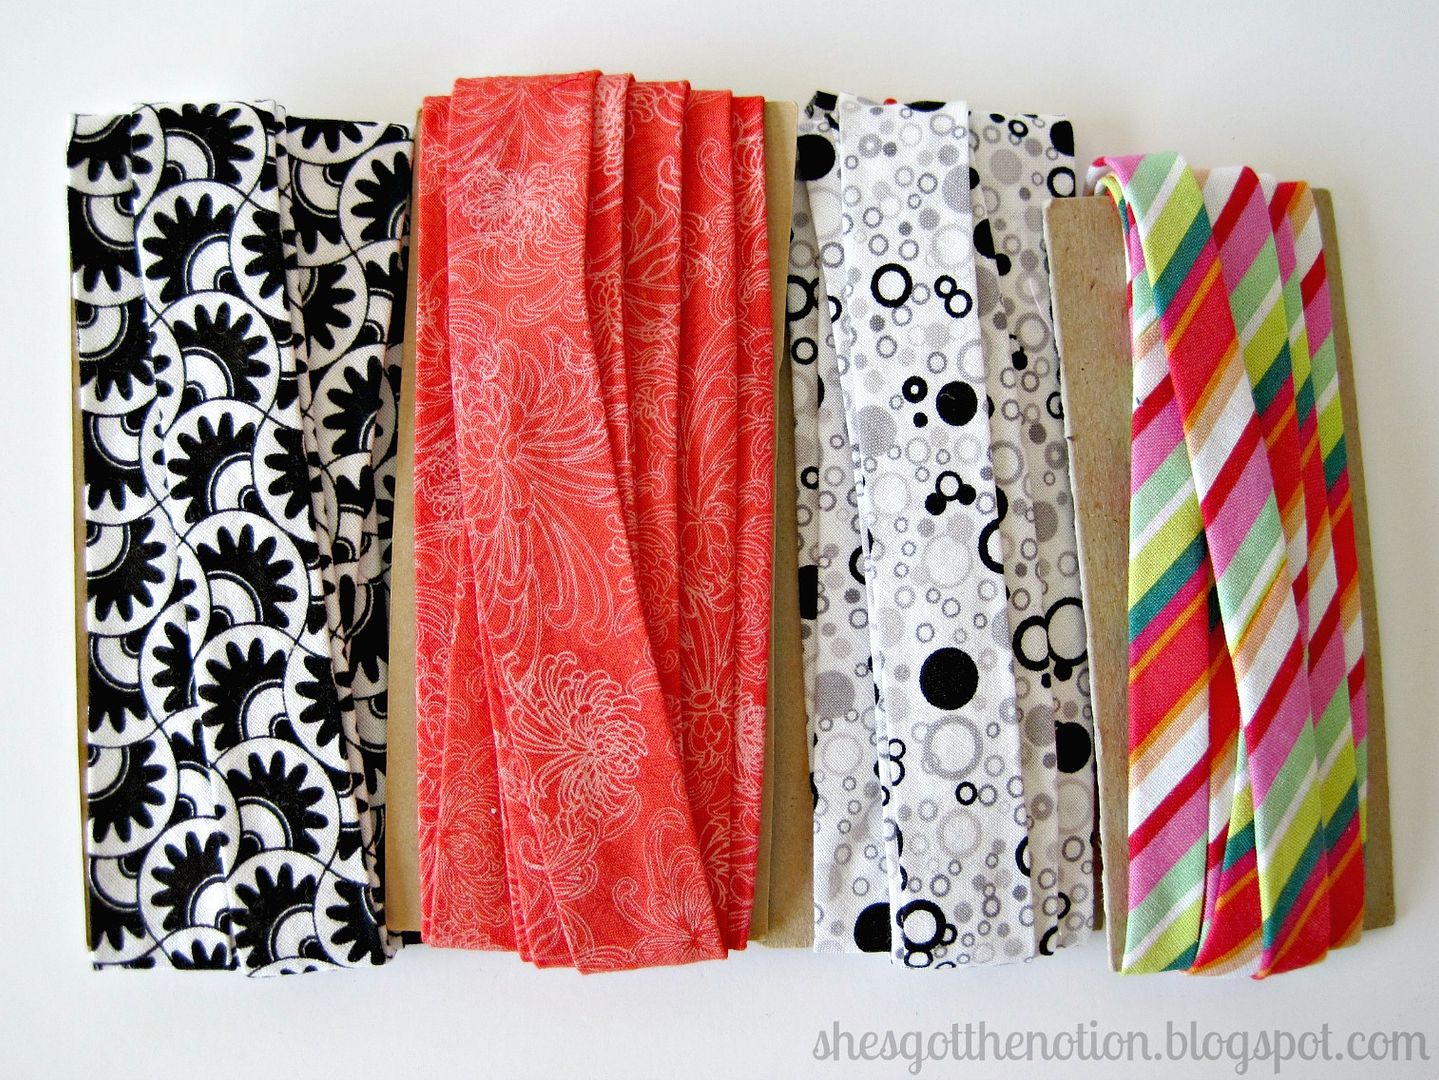 5 yards of bias tape from one fat quarter (plus more fat quarter sewing tutorials) | She's Got the Notion